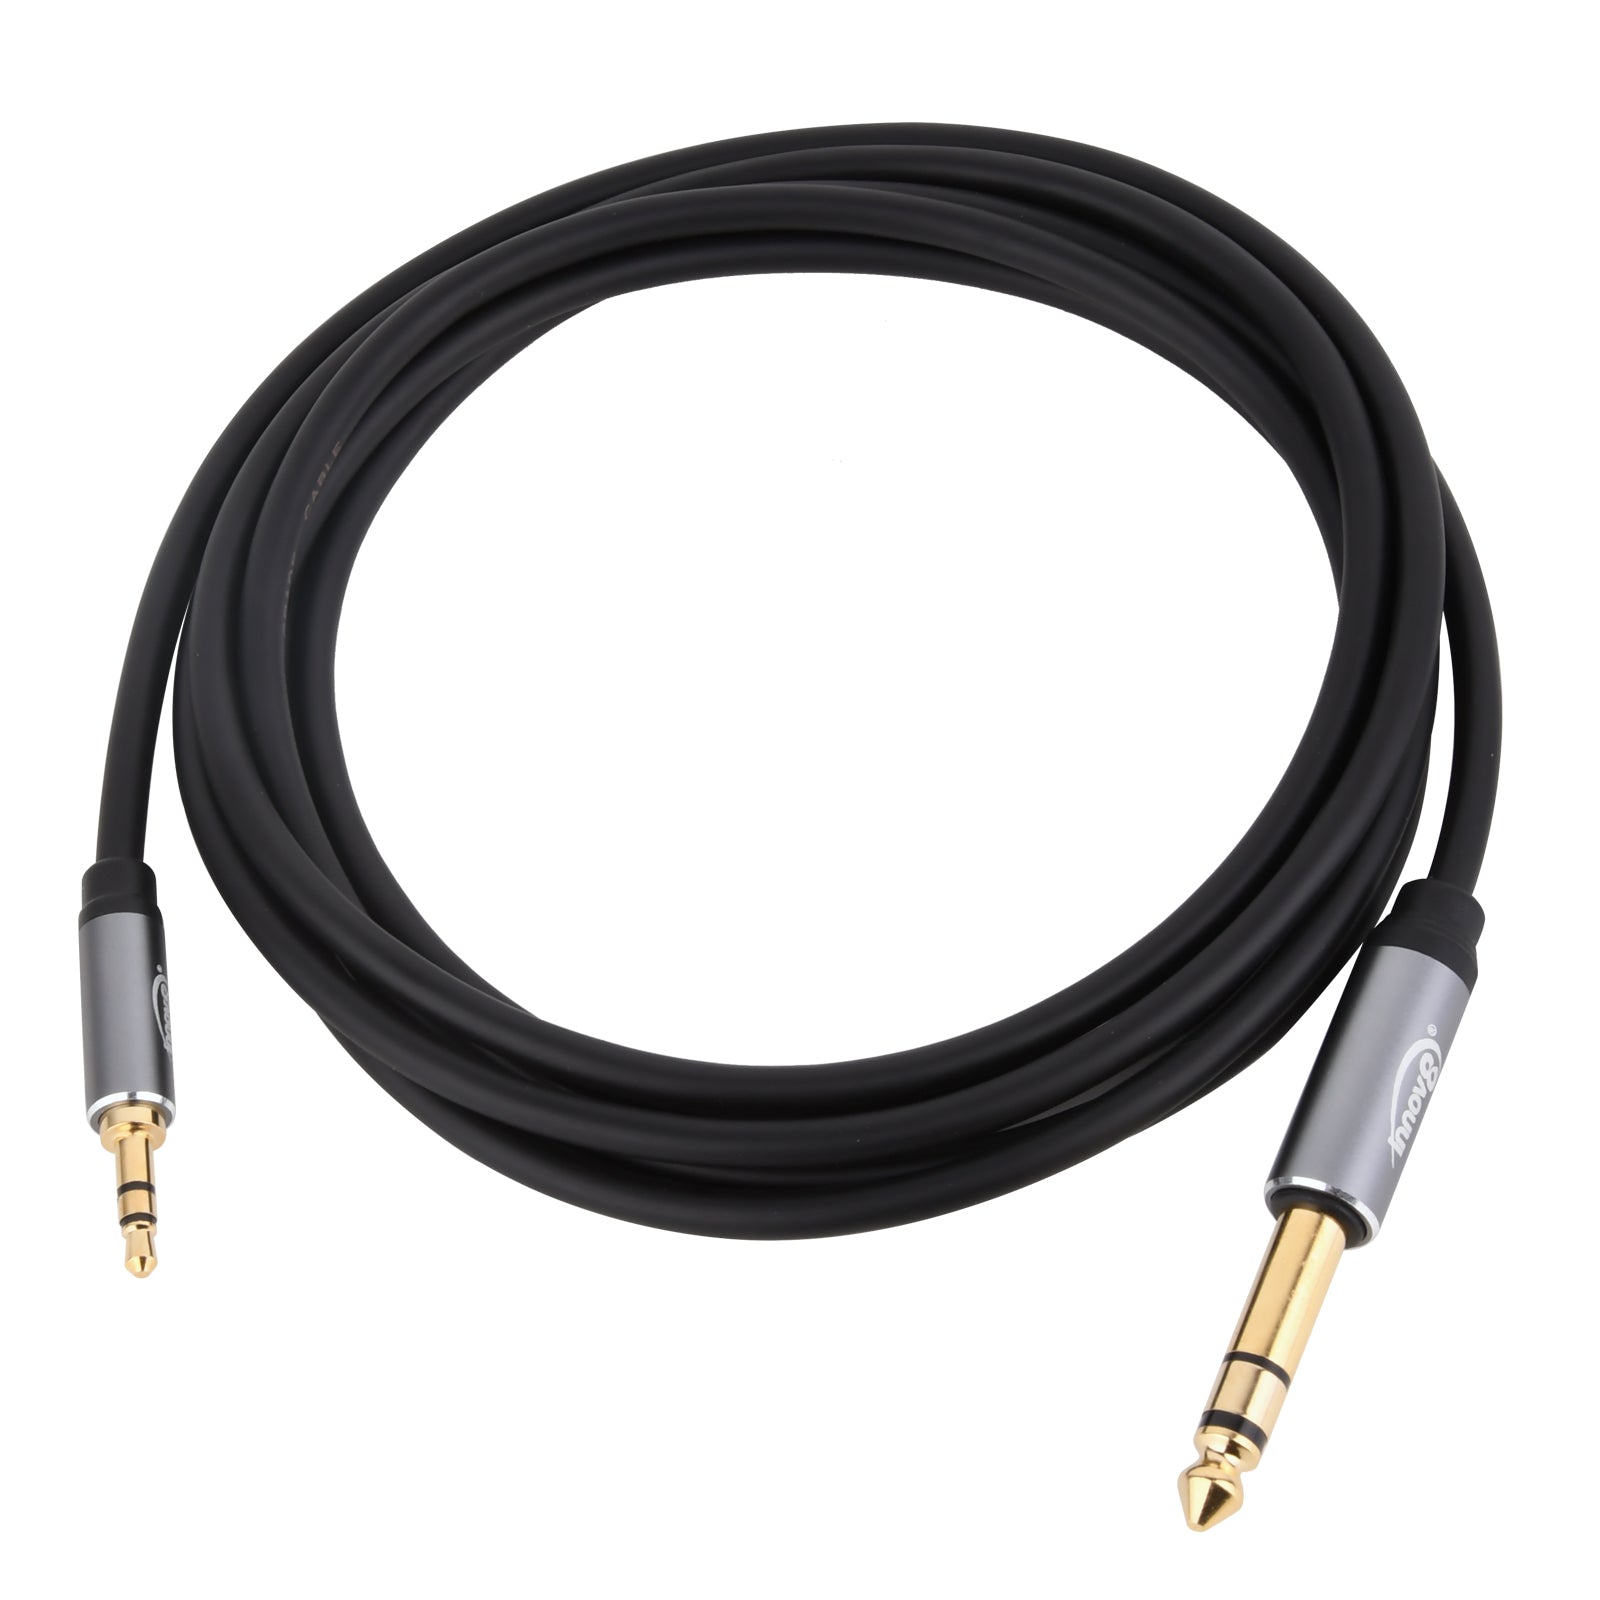 3.5mm to 6.35mm TRS Stereo Audio Cable 1.8m